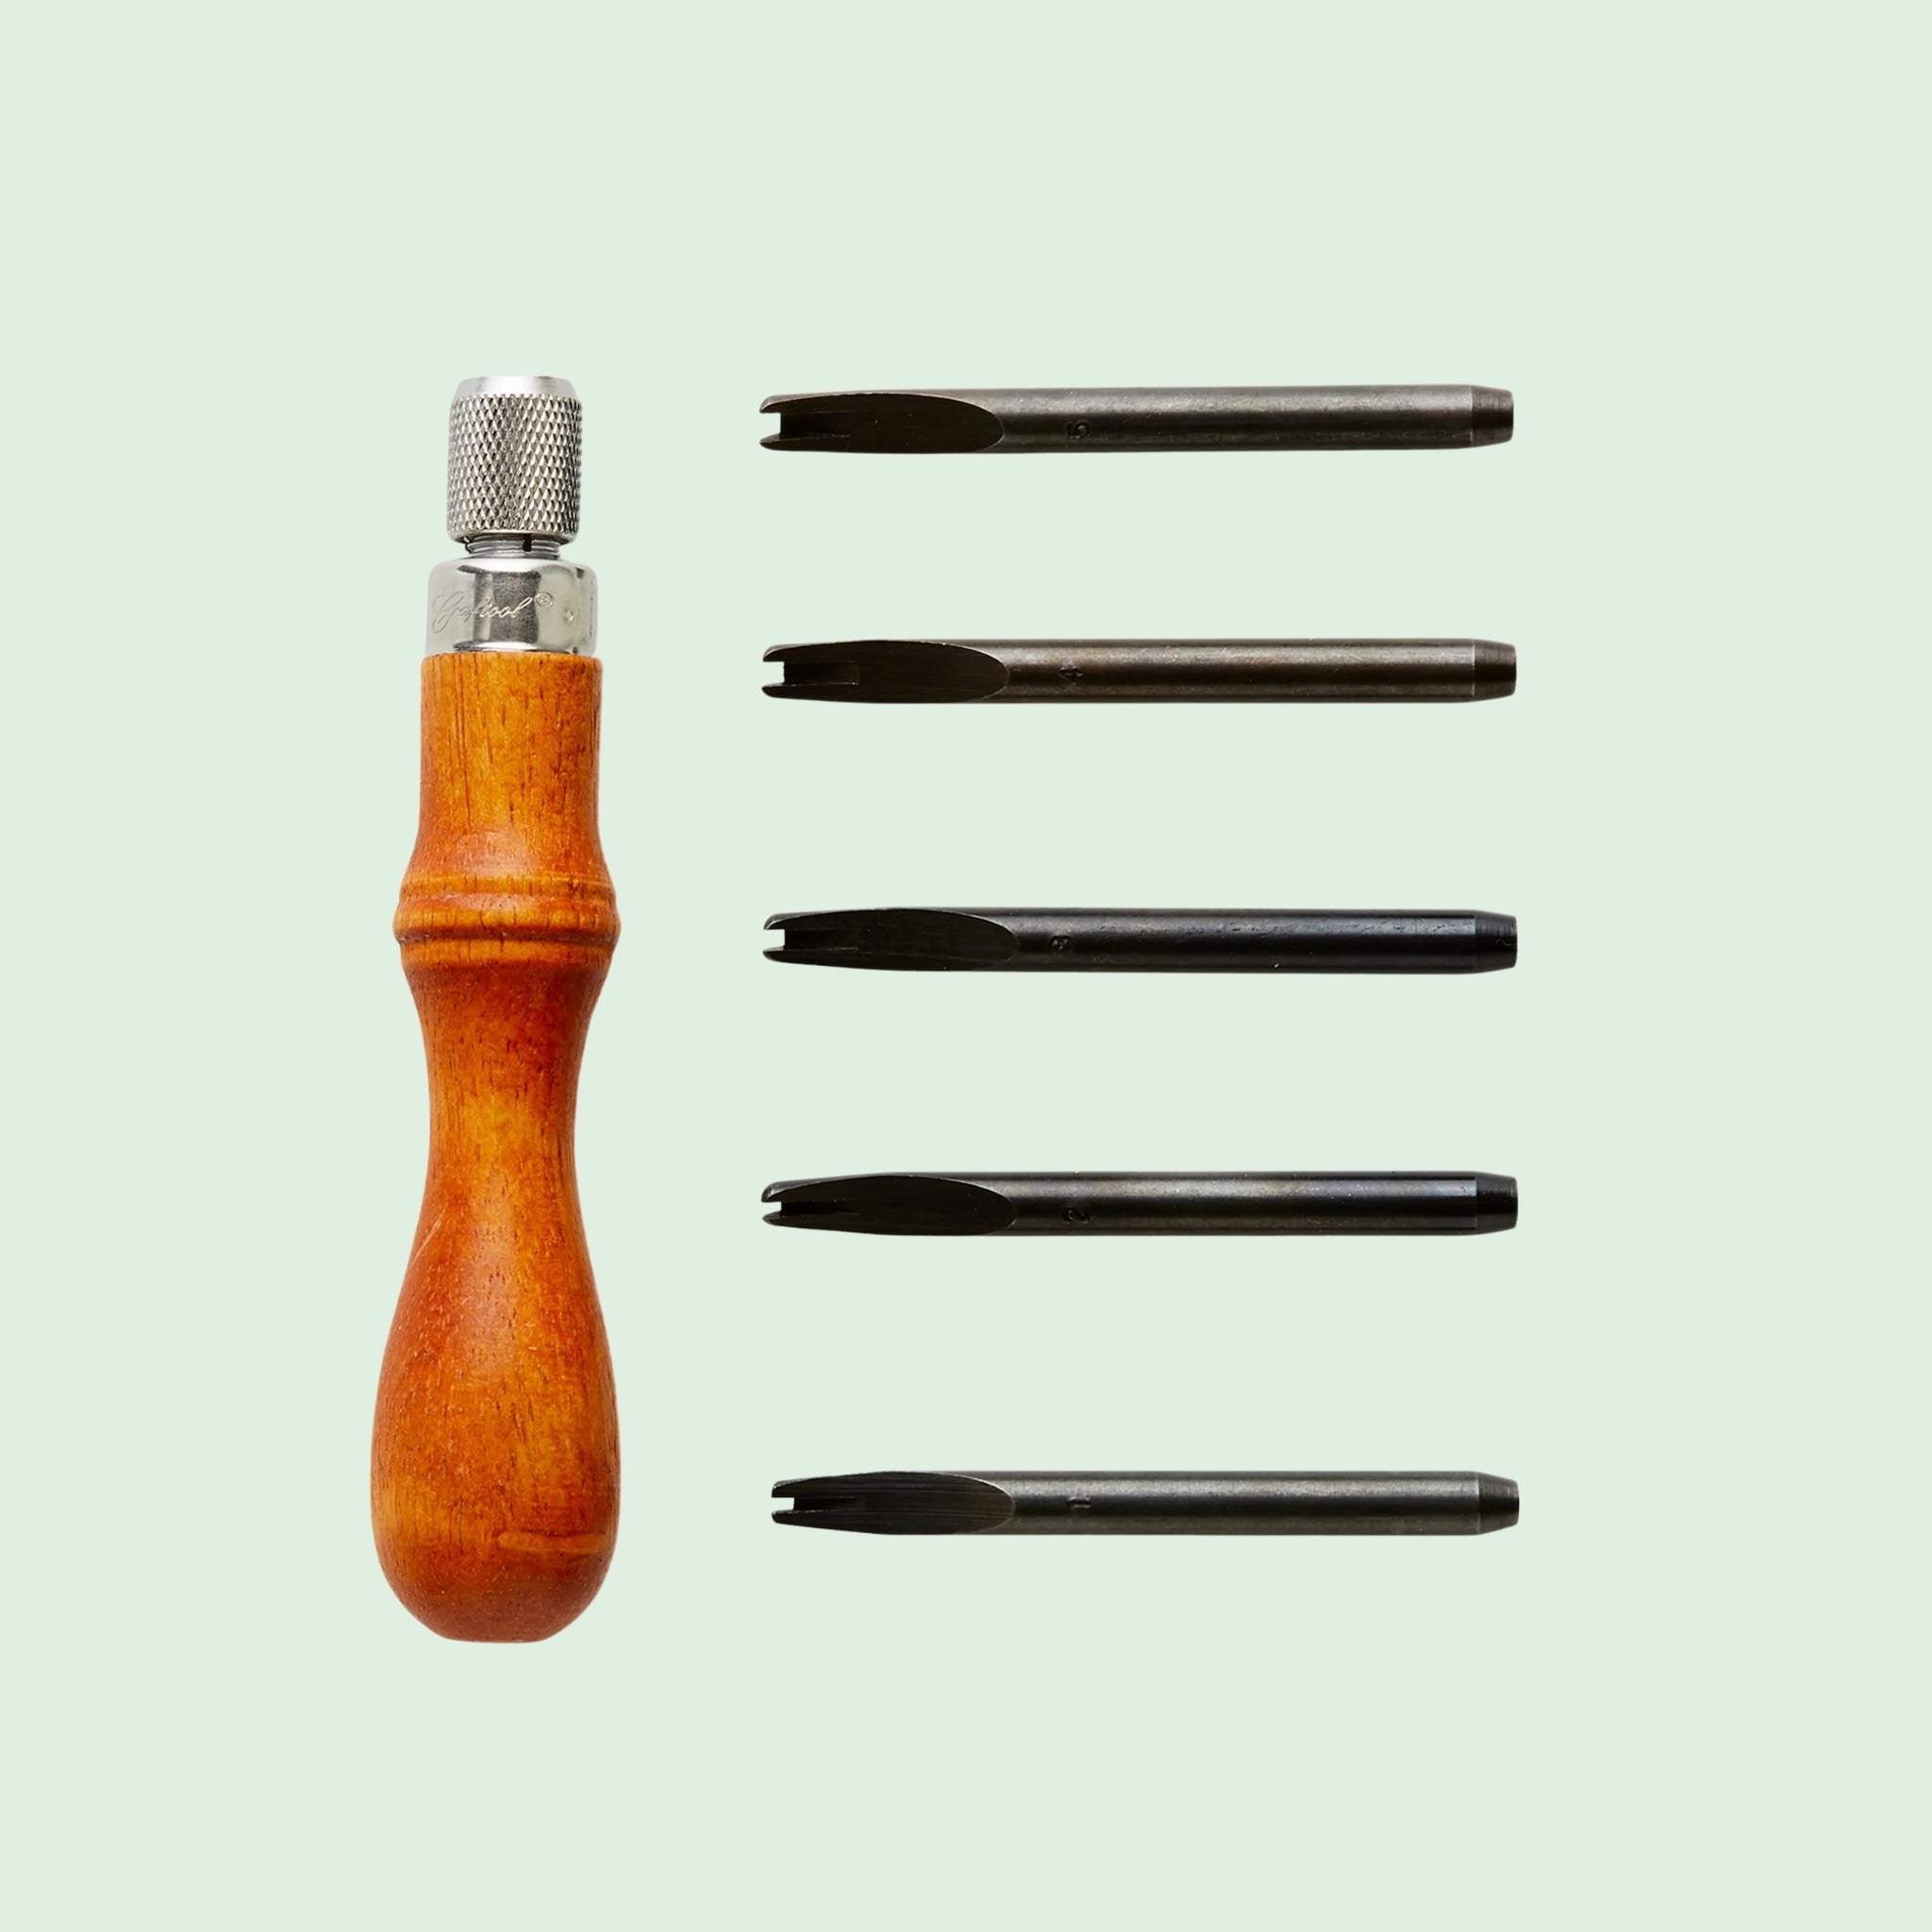 Handle with five edge beveller blades for rounding off vegetable tanned leather edges prior to slicking.  Bevels and rounds edges on a variety of leather projects. The larger the size, the more leather removed. Compatible with a range of leather weights and thickness.